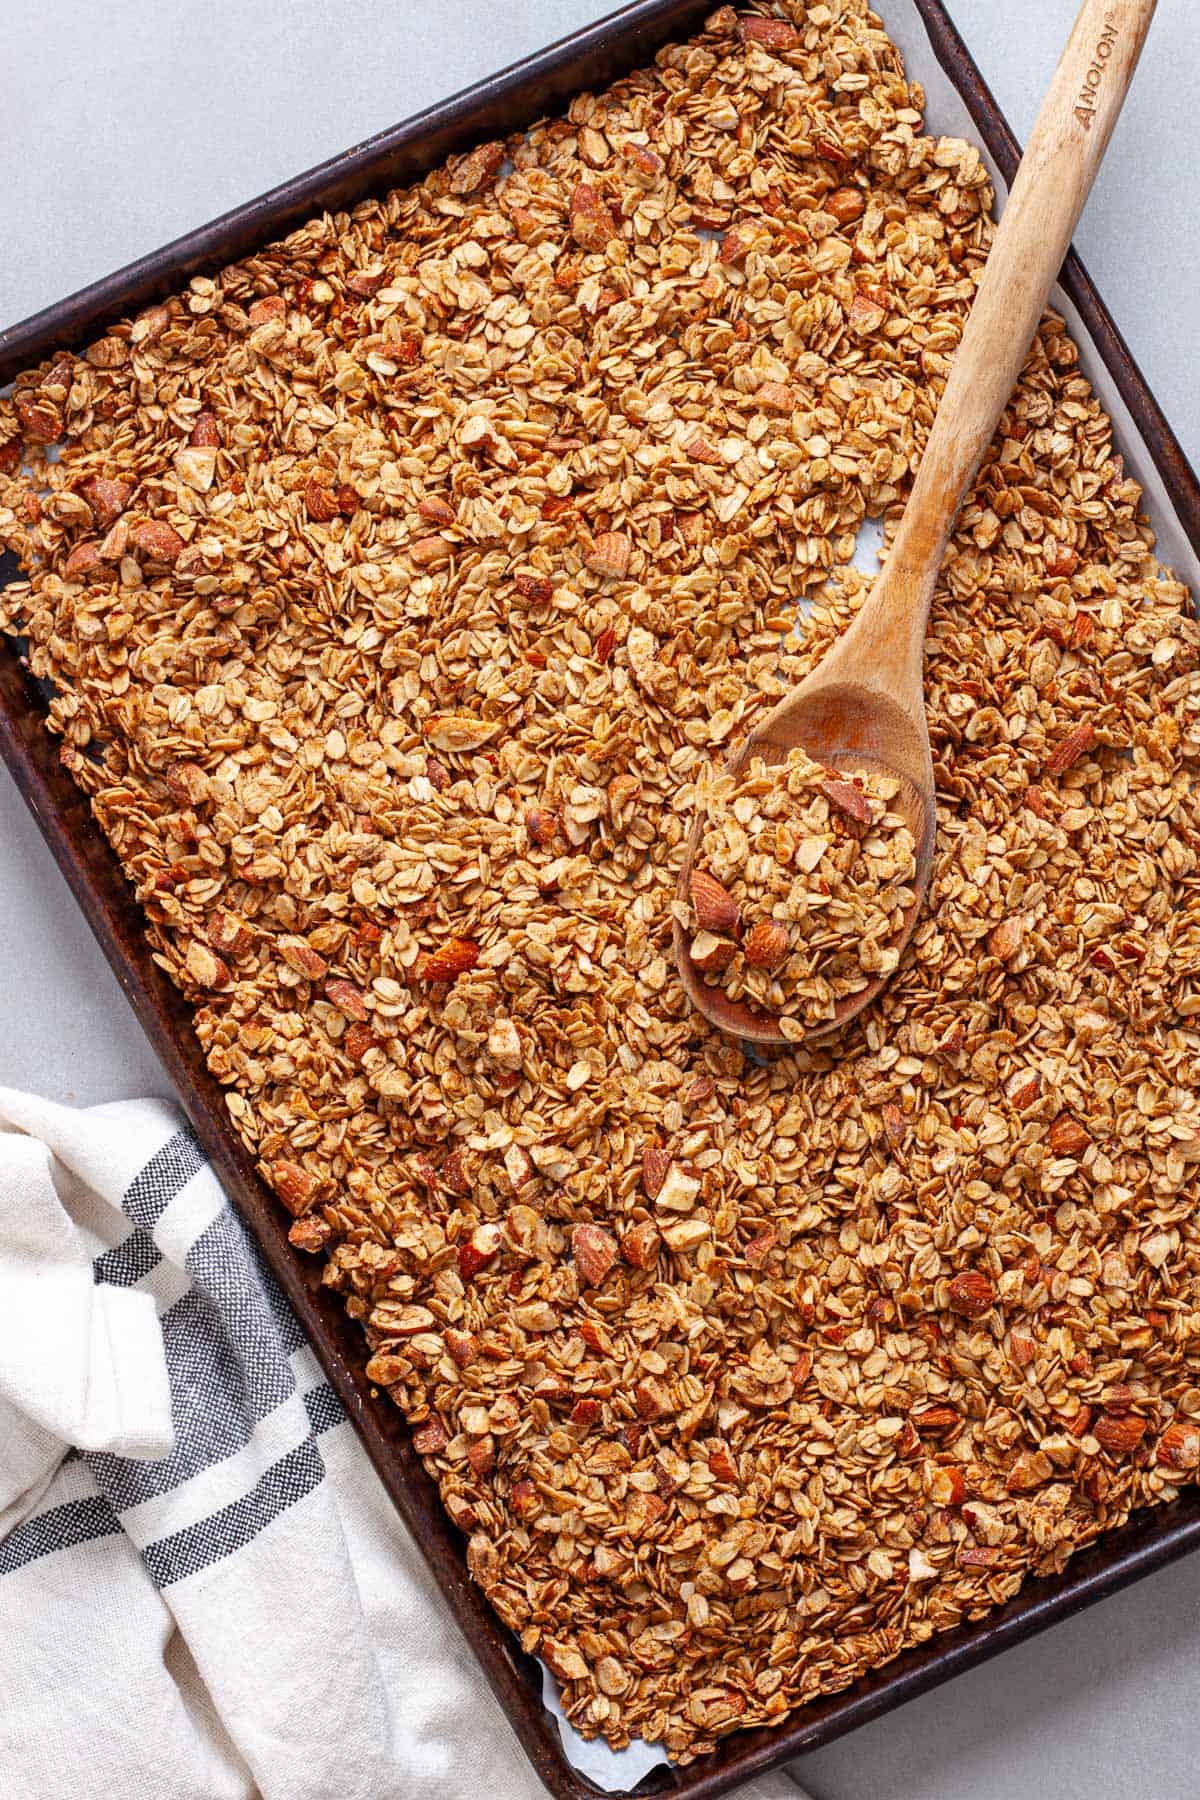 Homemade granola on a parchment lined baking sheet.